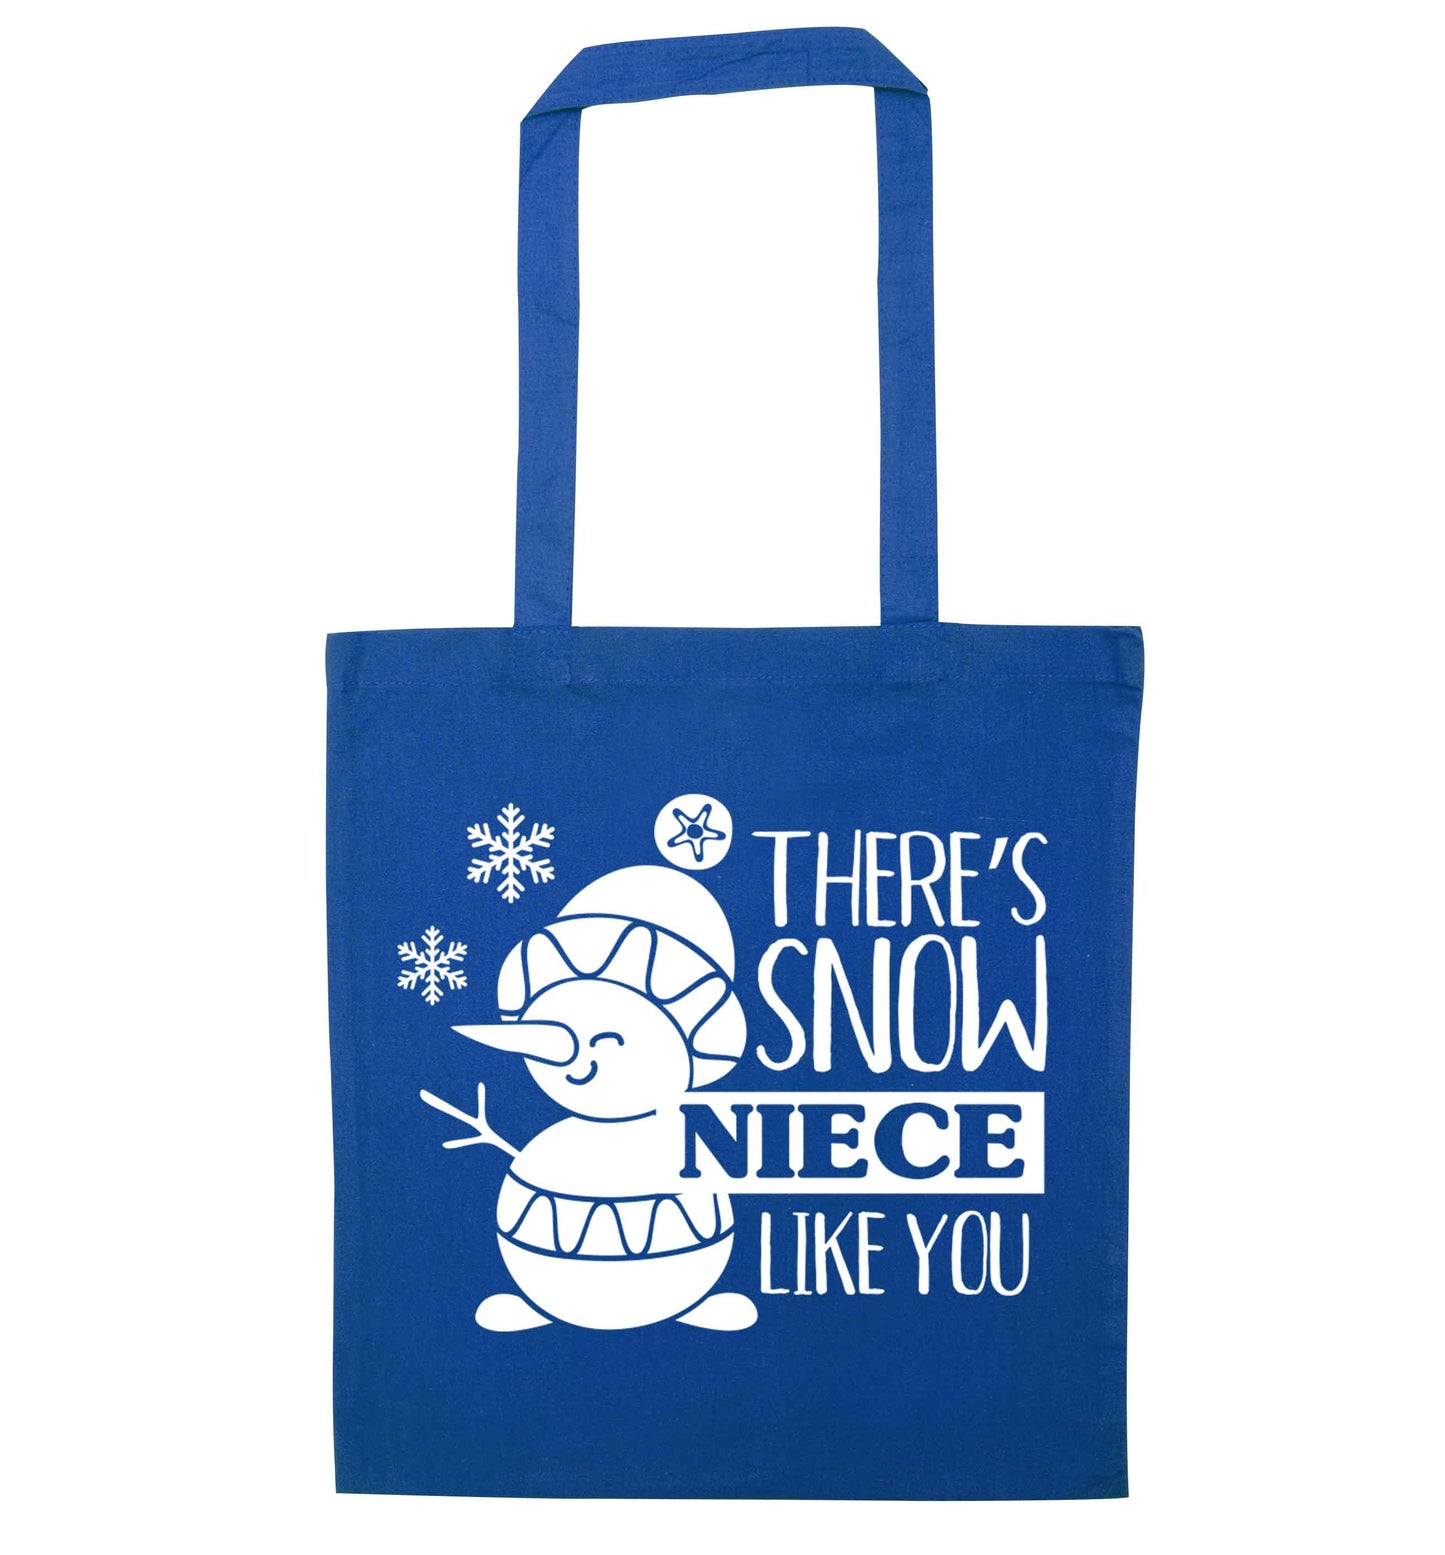 There's snow niece like you blue tote bag